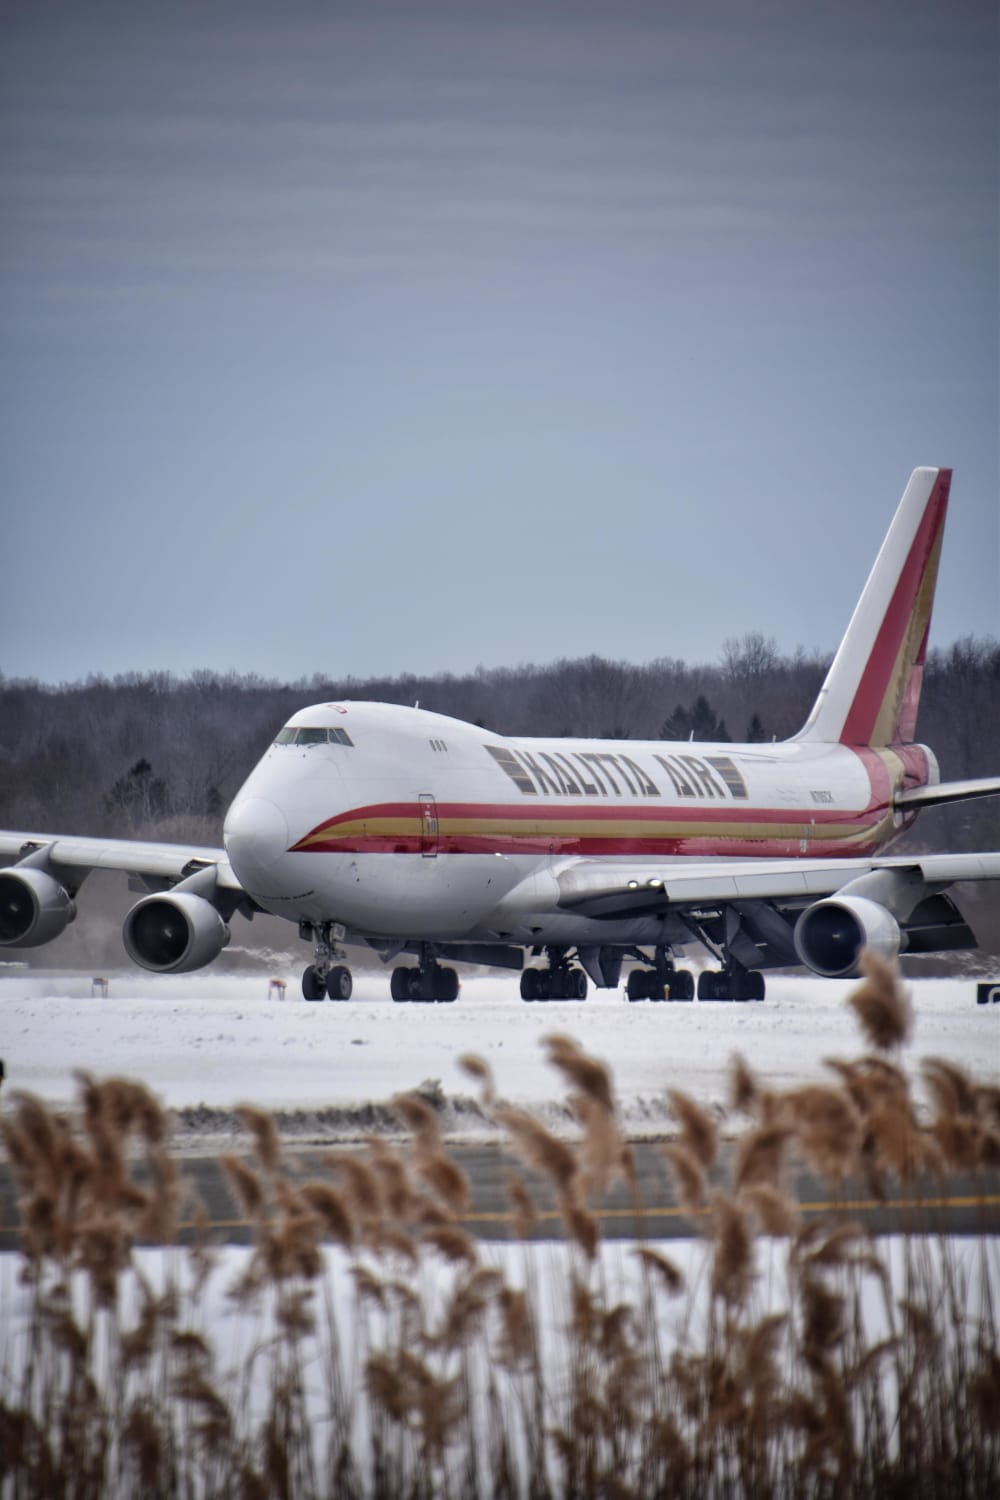 Kalitta Air N705CK at Stewart Airport after the 5 hour long flight from Los Angeles